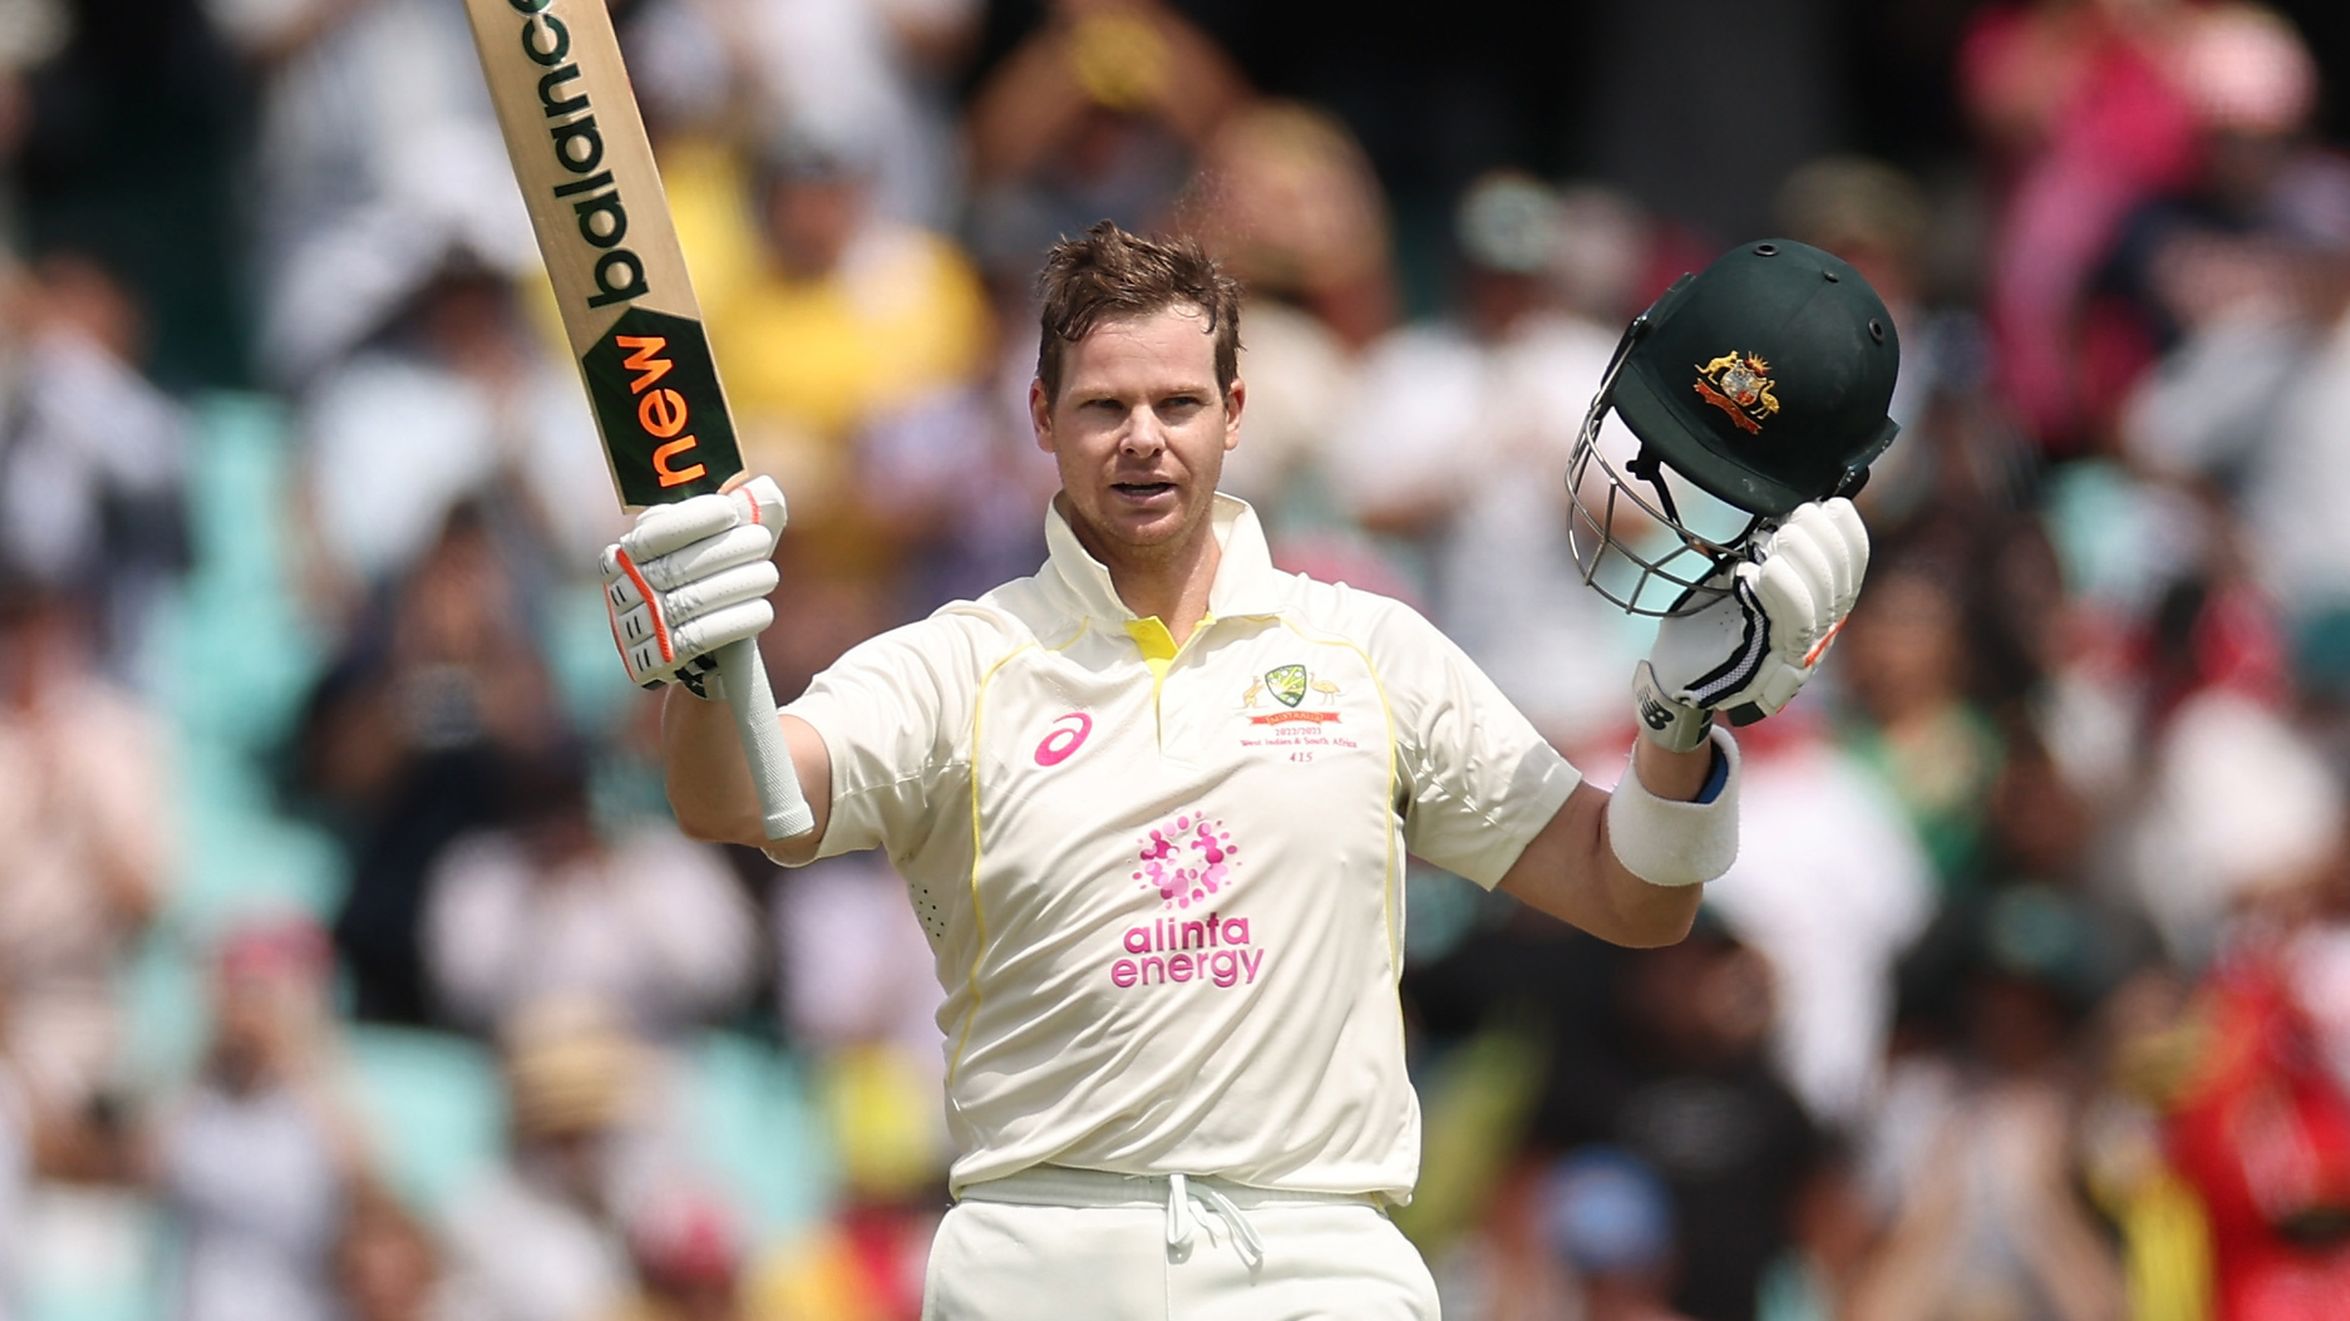 Steve Smith of Australia celebrates his century during day two of the Second Test match in the series between Australia and South Africa at Sydney Cricket Ground on January 05, 2023 in Sydney, Australia. (Photo by Cameron Spencer/Getty Images)